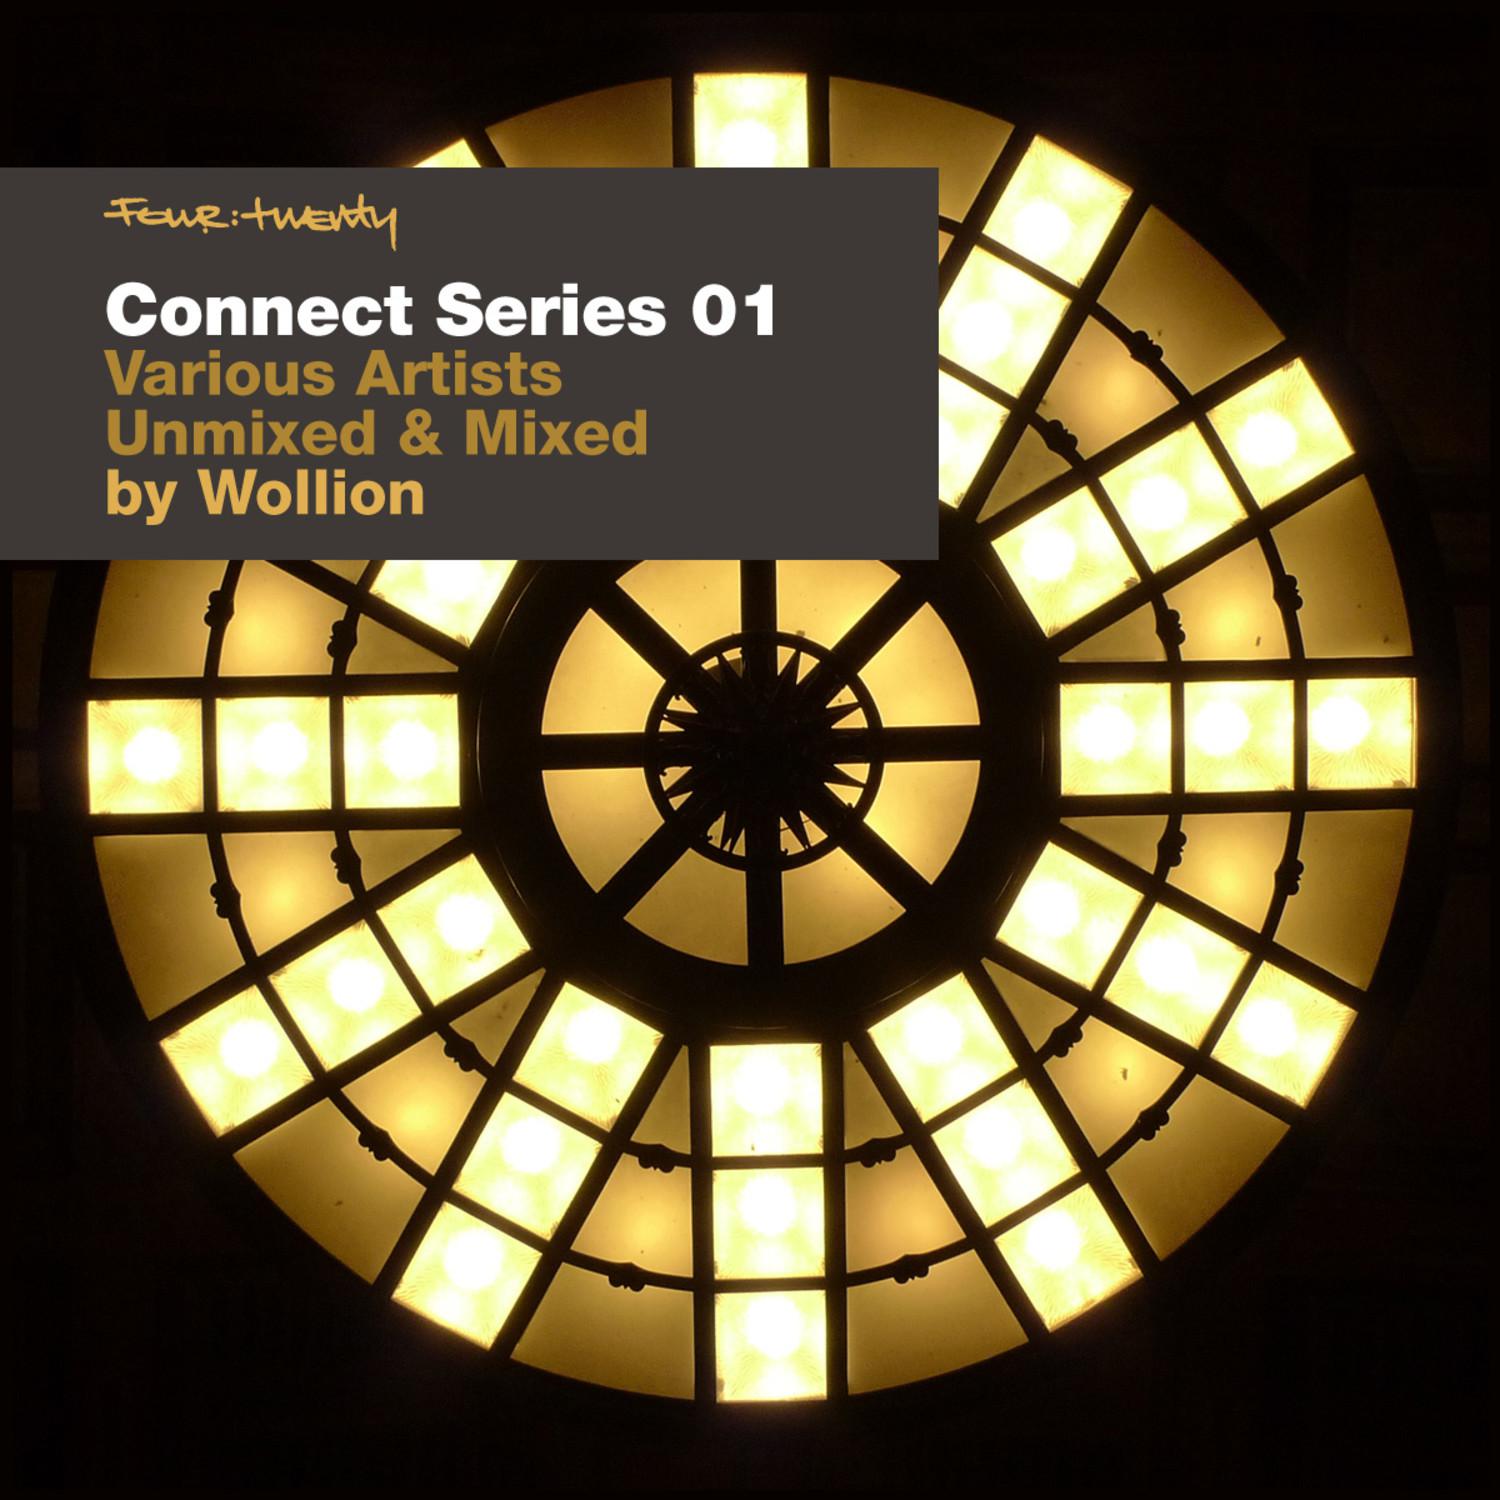 Four:Twenty presents Connect Series 01 - Unmixed and Mixed by Wollion